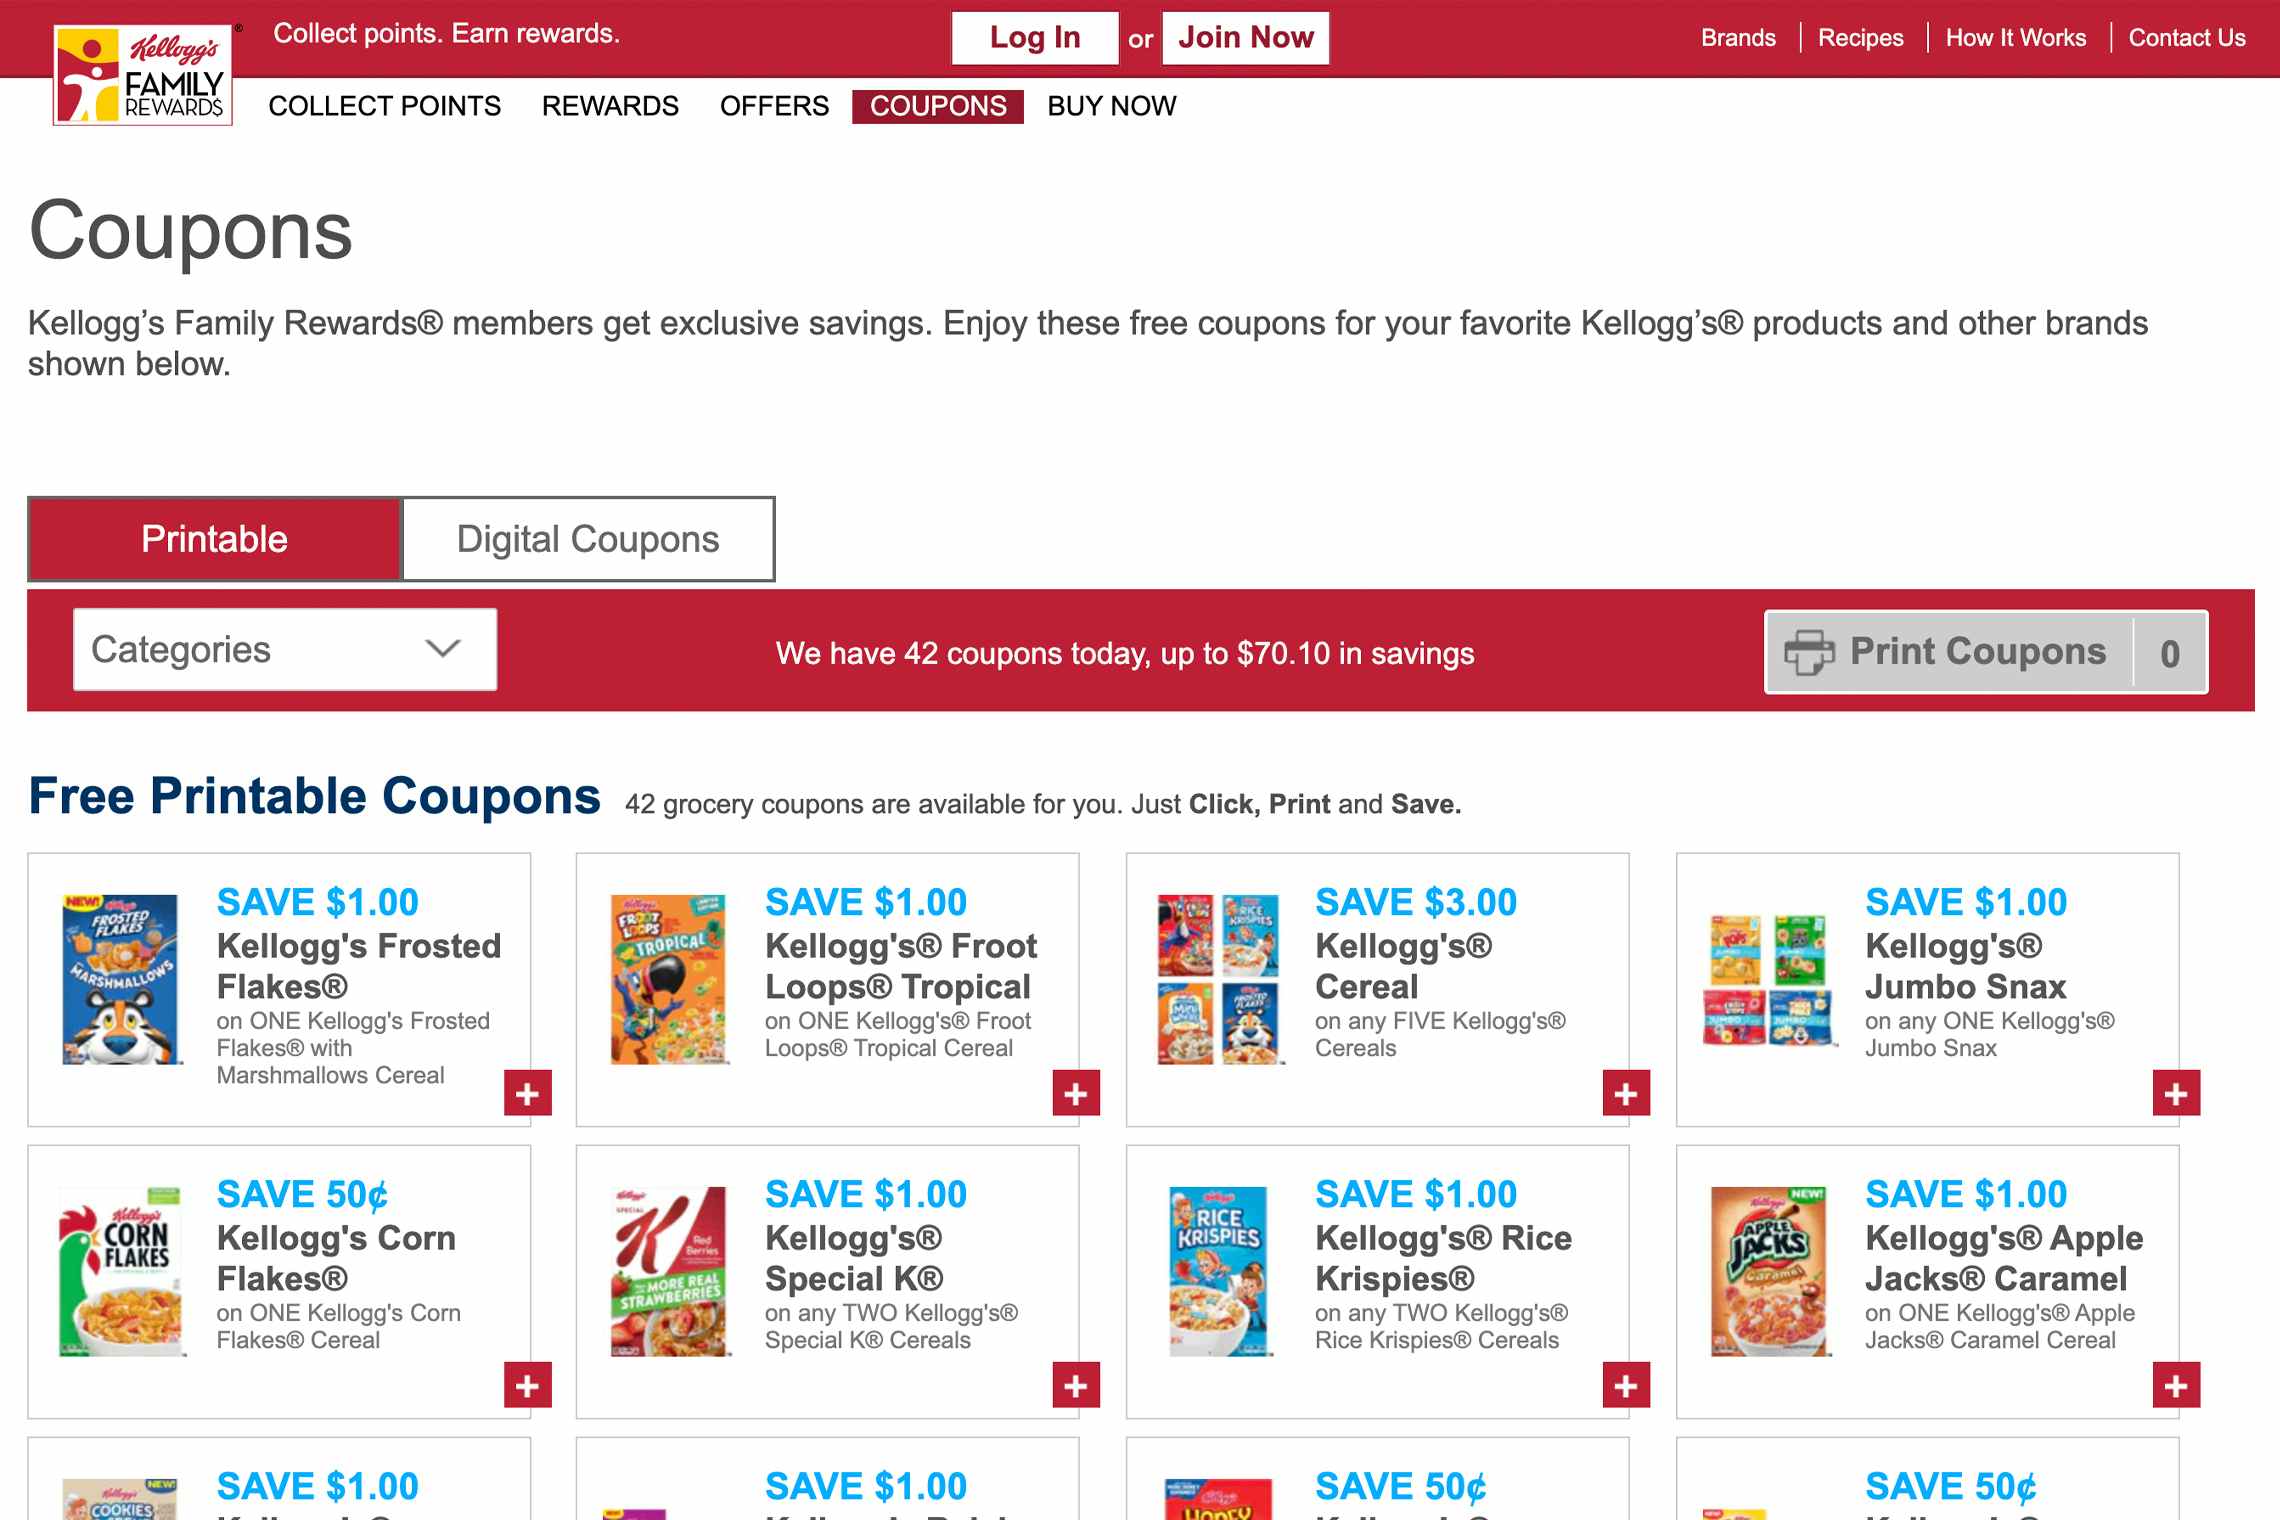 Kellogg's website page with coupons to print.